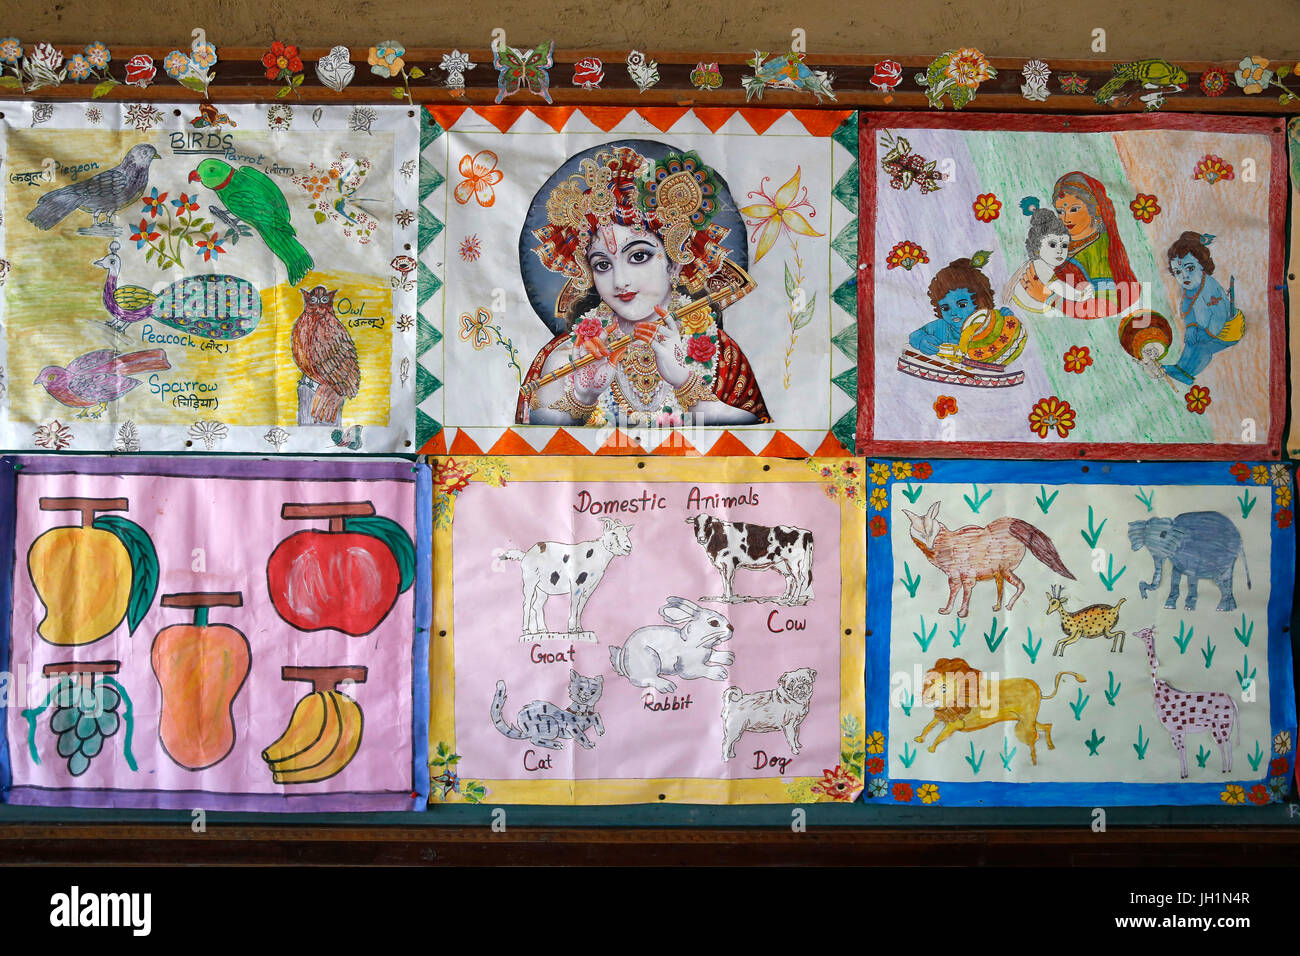 Sandipani Muni School for needy girls run by Food for Life Vrindavan. Pupil's drawing exhibited in classroom. India. Stock Photo